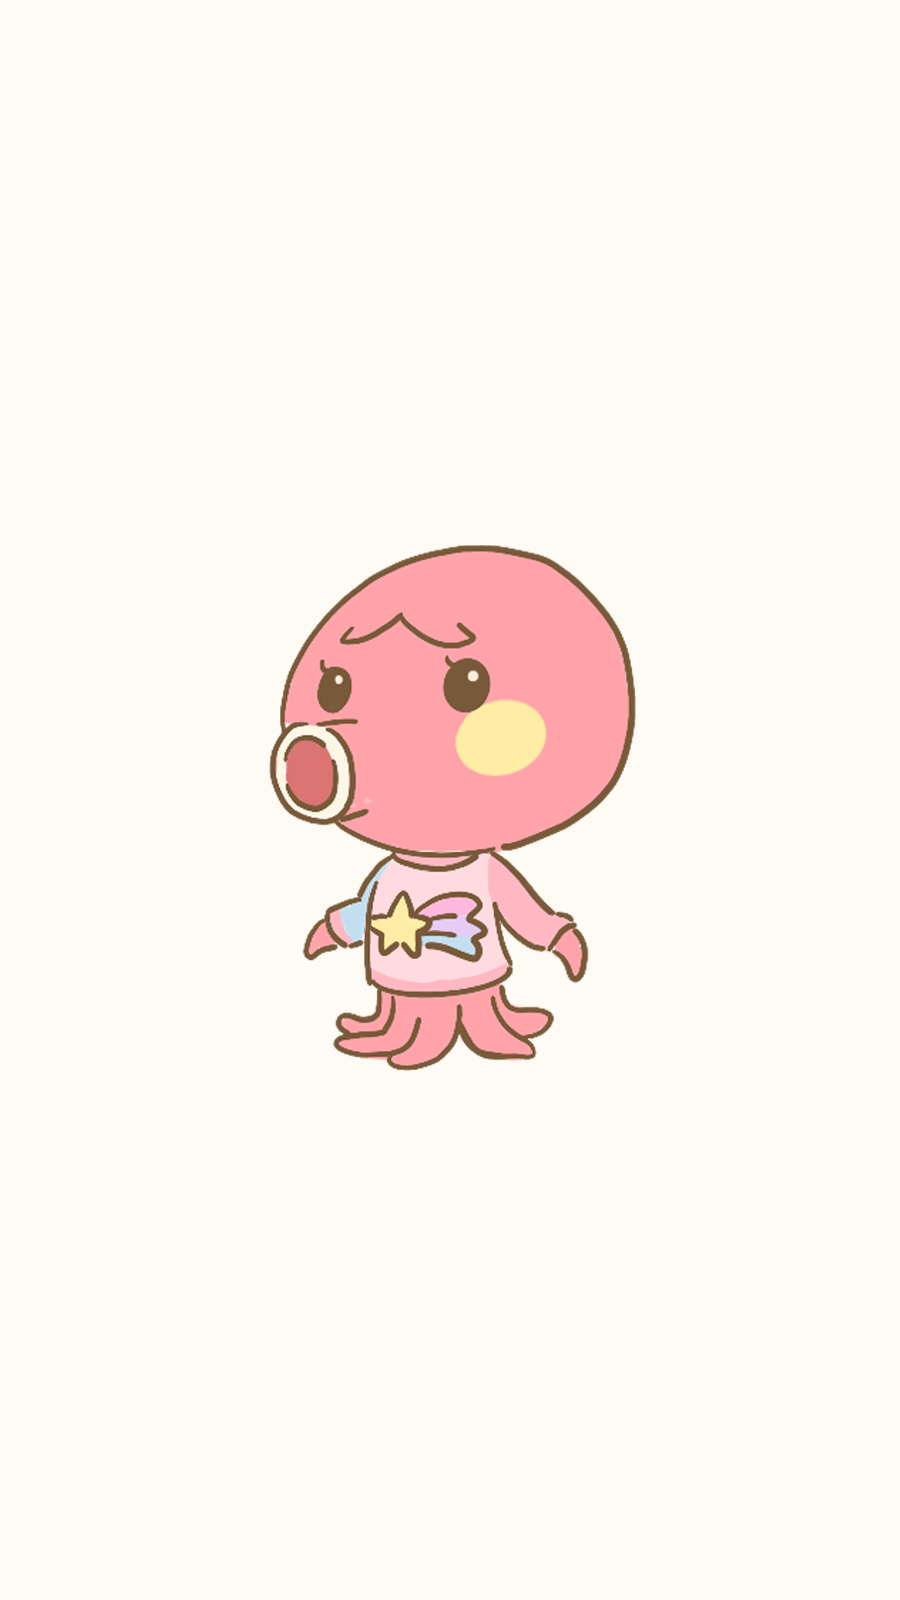 Cute Hand Painted Animal Pink Octopus Instagram Highlight预览效果